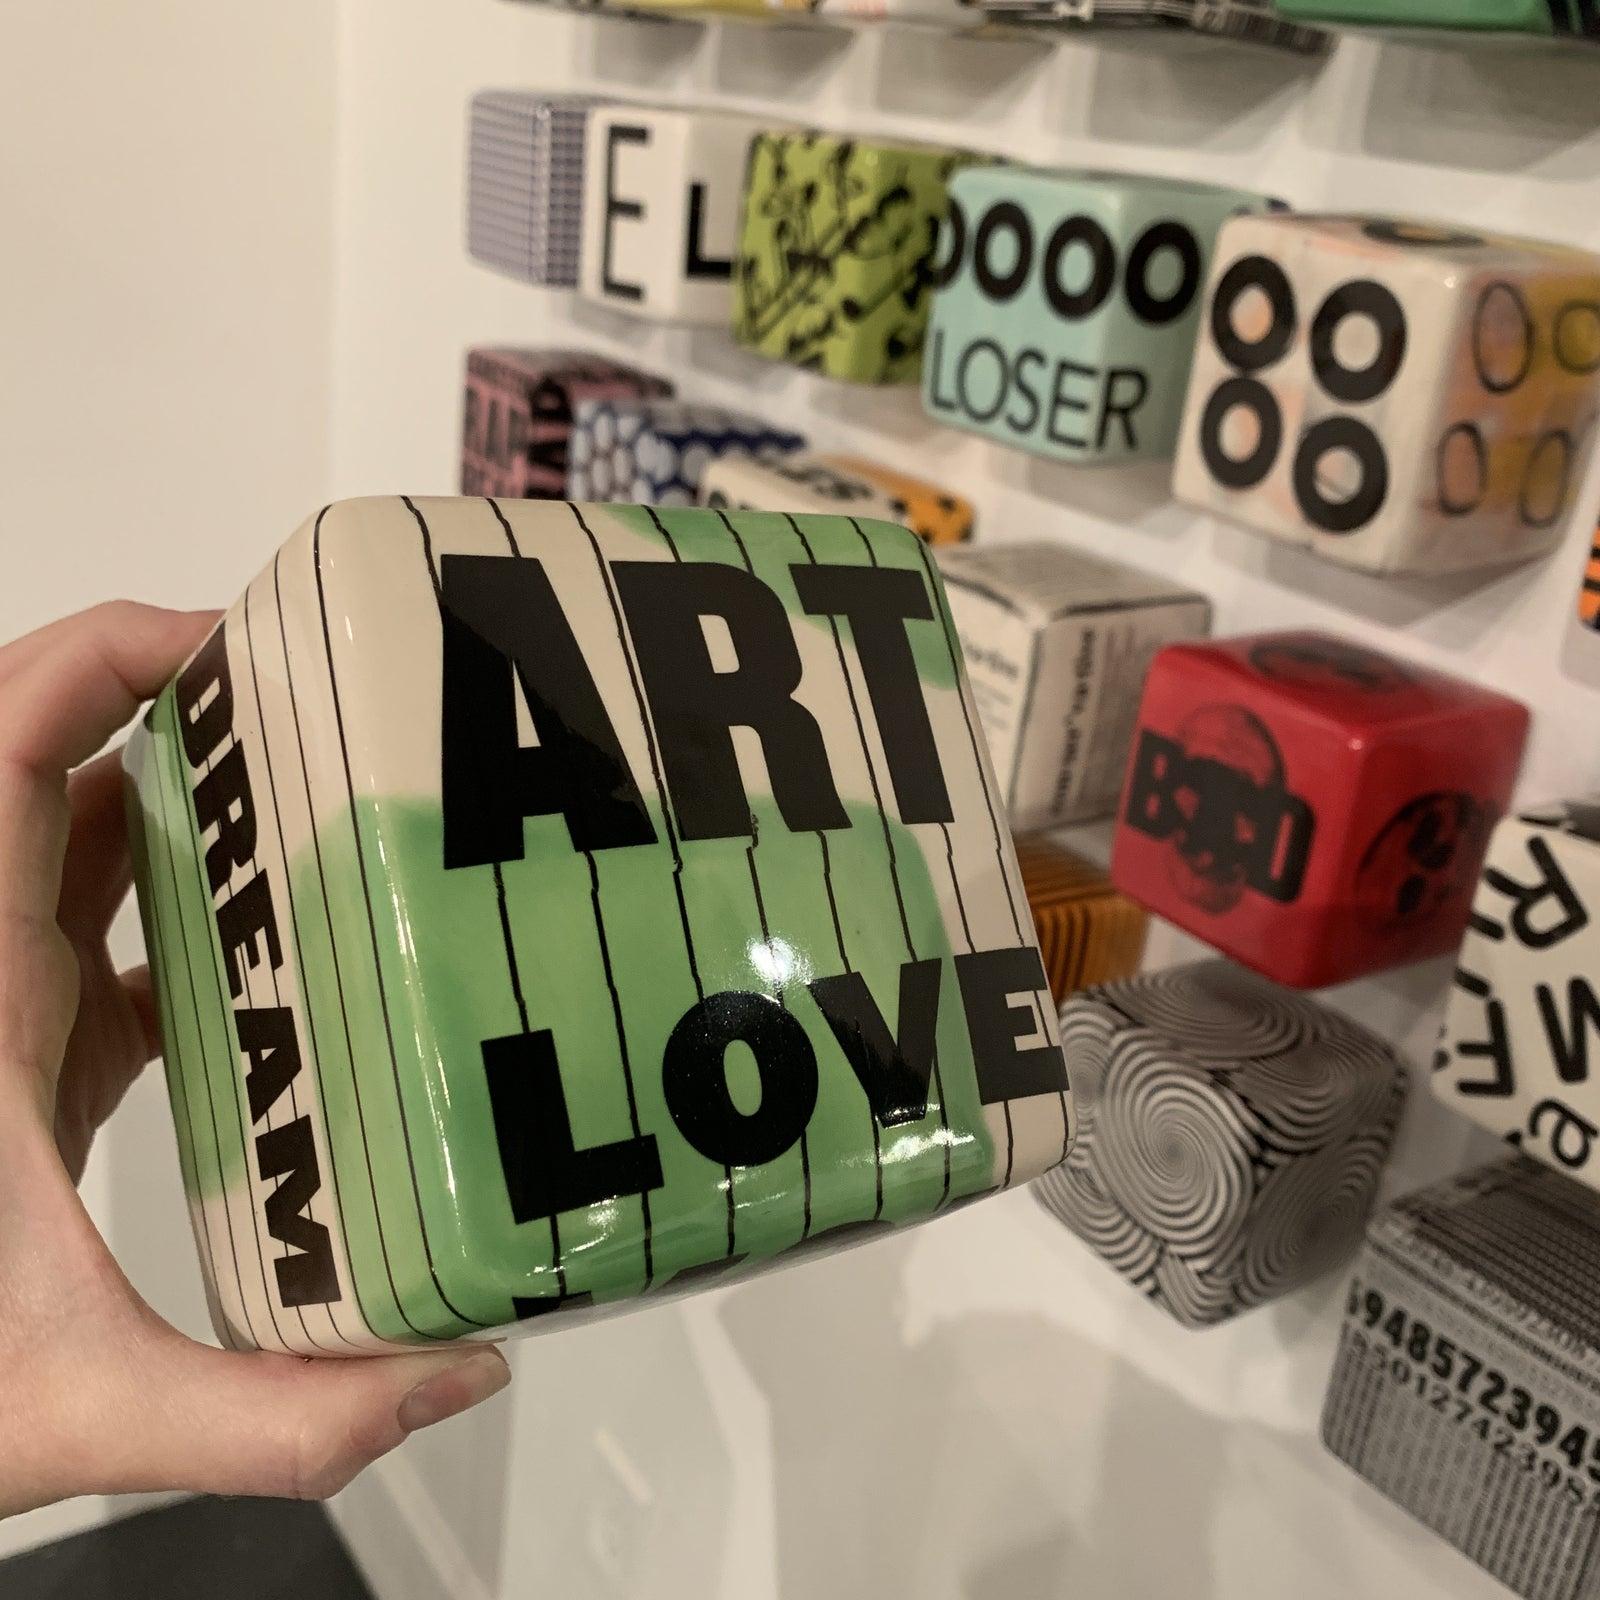 Artist: Kaiser Suidan
4 x 4 x 4 Ceramic Cube with Decal
Can be easily hung or displayed

Quote on the Cube reads: ART LOVE PLAY in green, black and white 